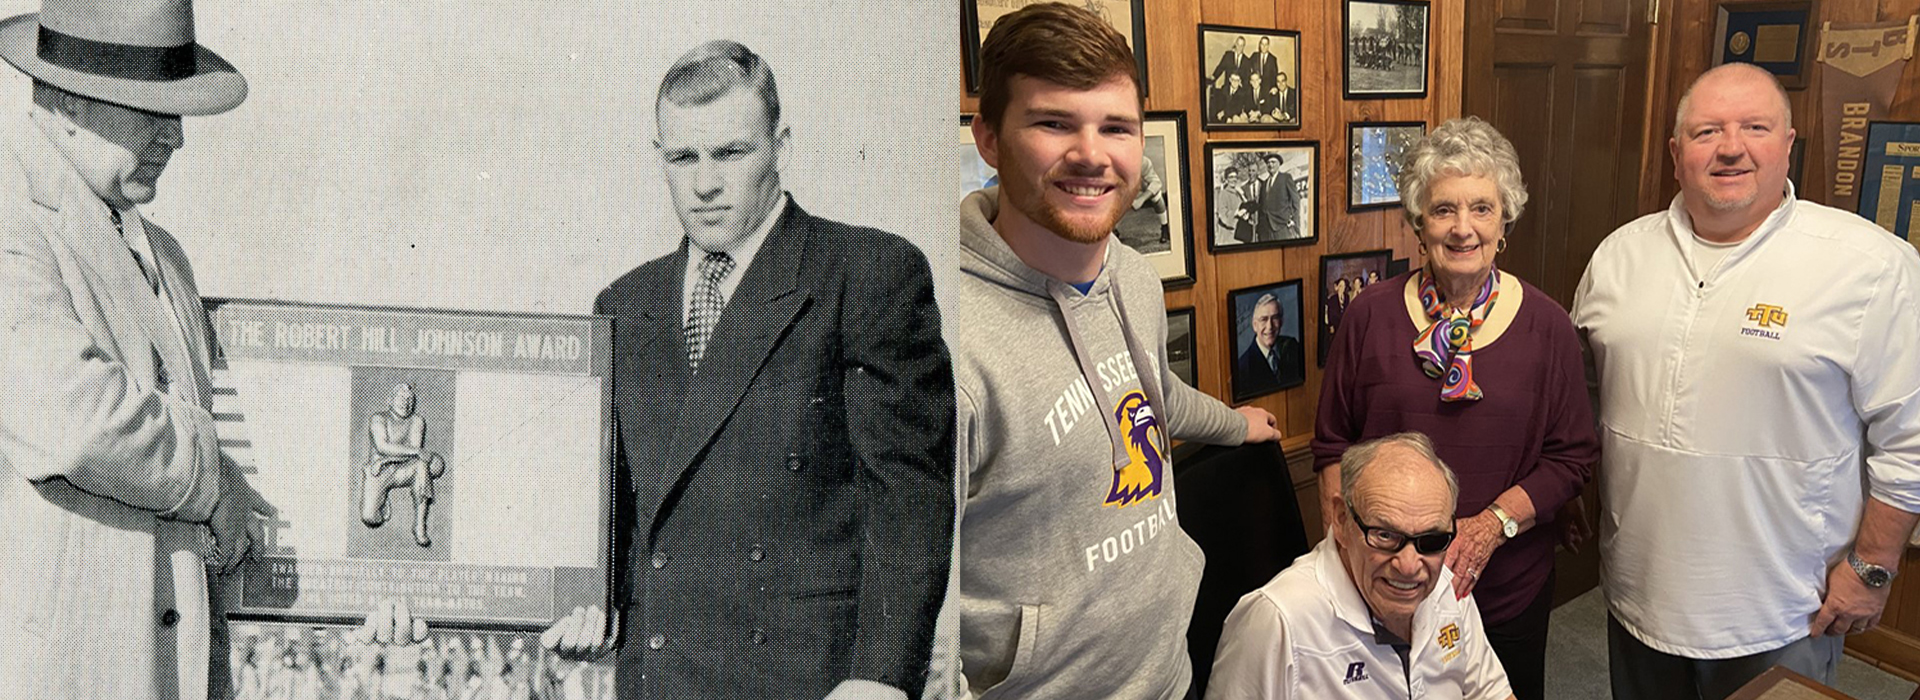 Long-time Tennessee Tech supporter Bill Johnson passes away at 84